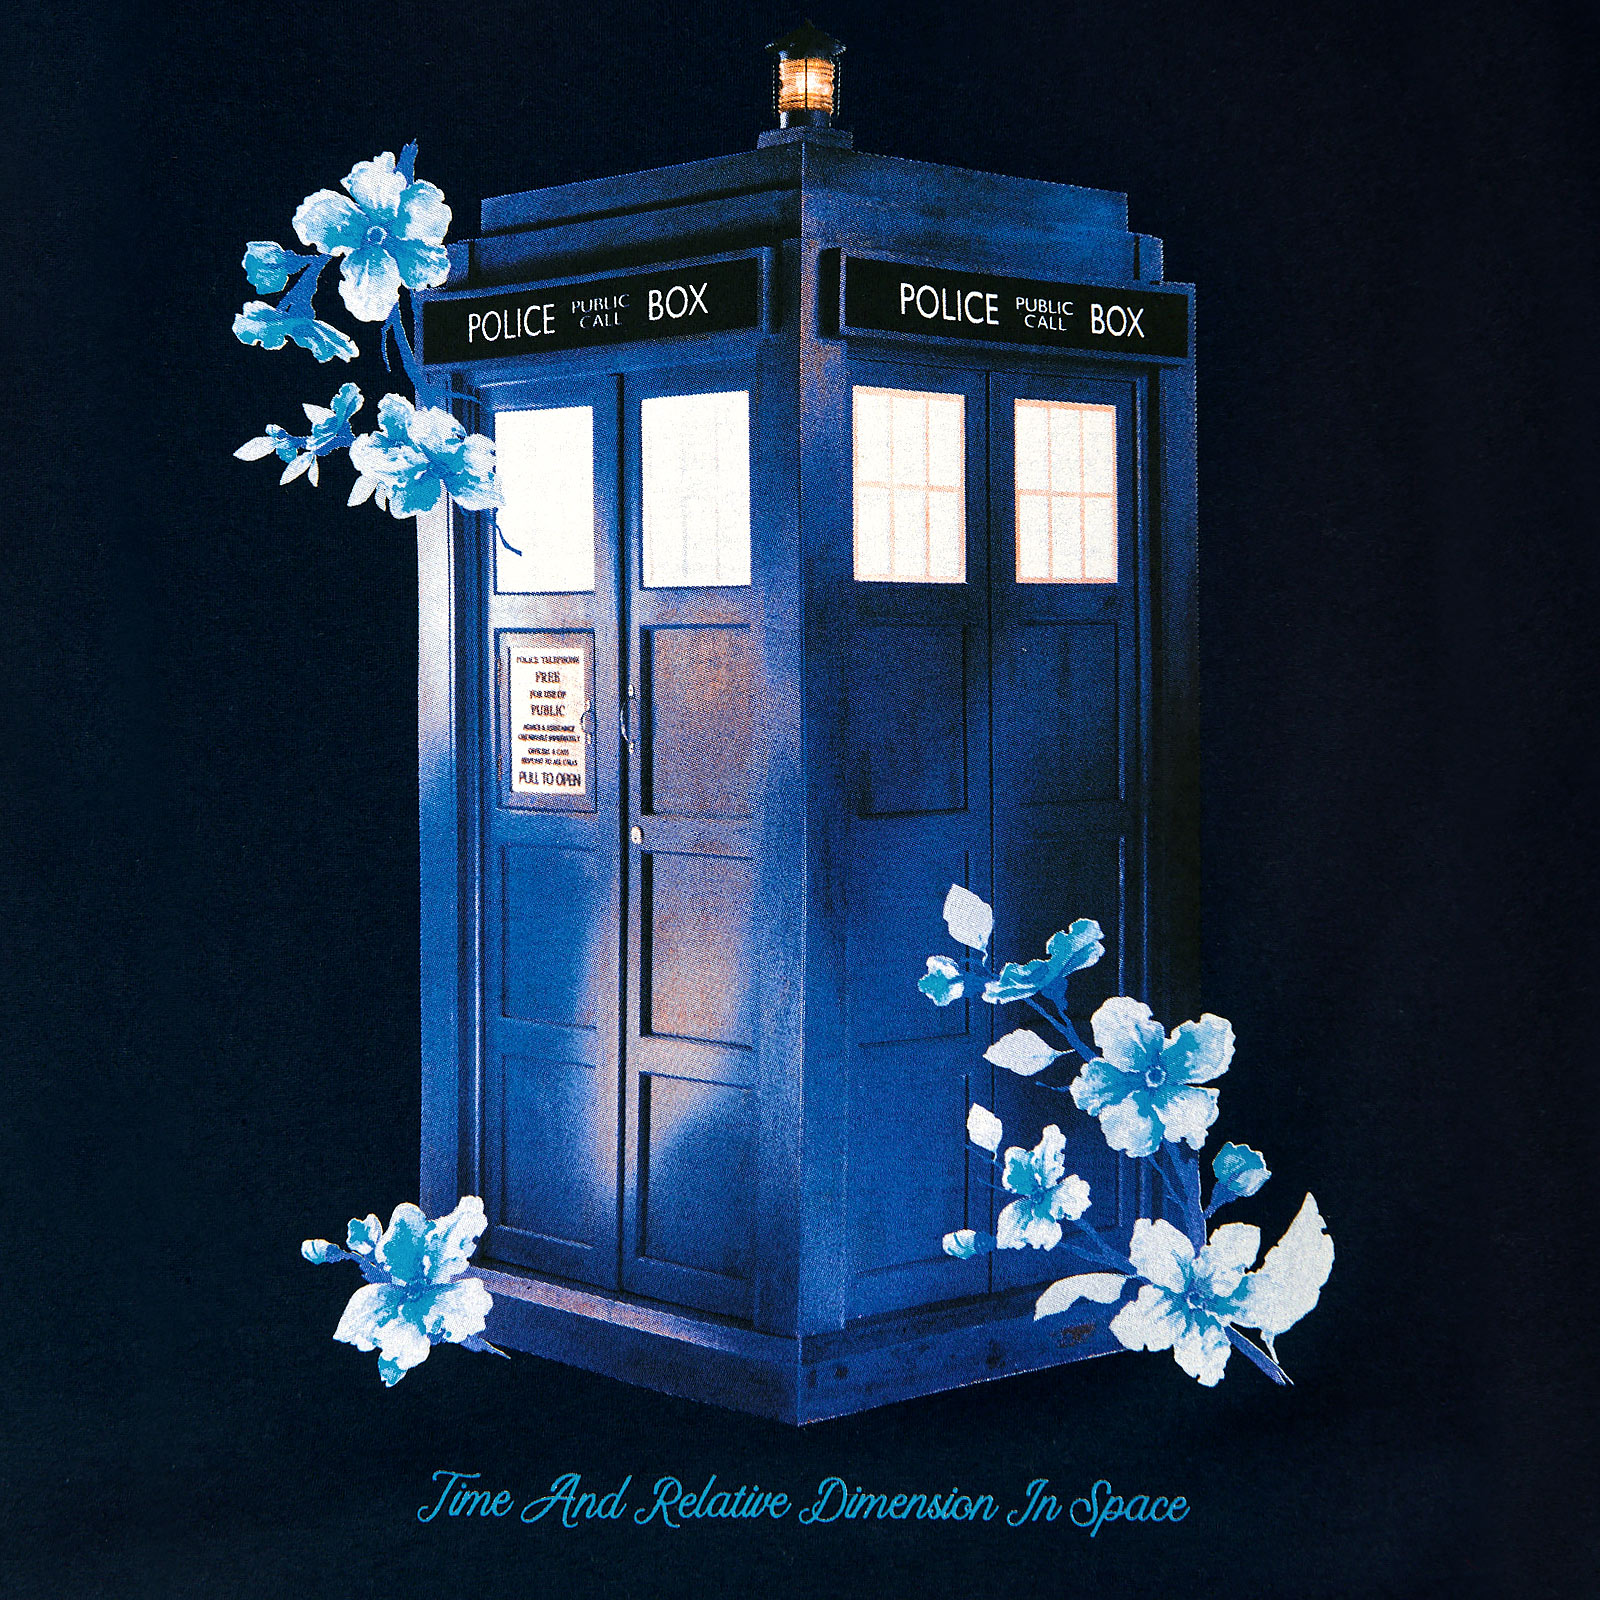 Doctor Who - Floral Tardis Women's T-Shirt Blue